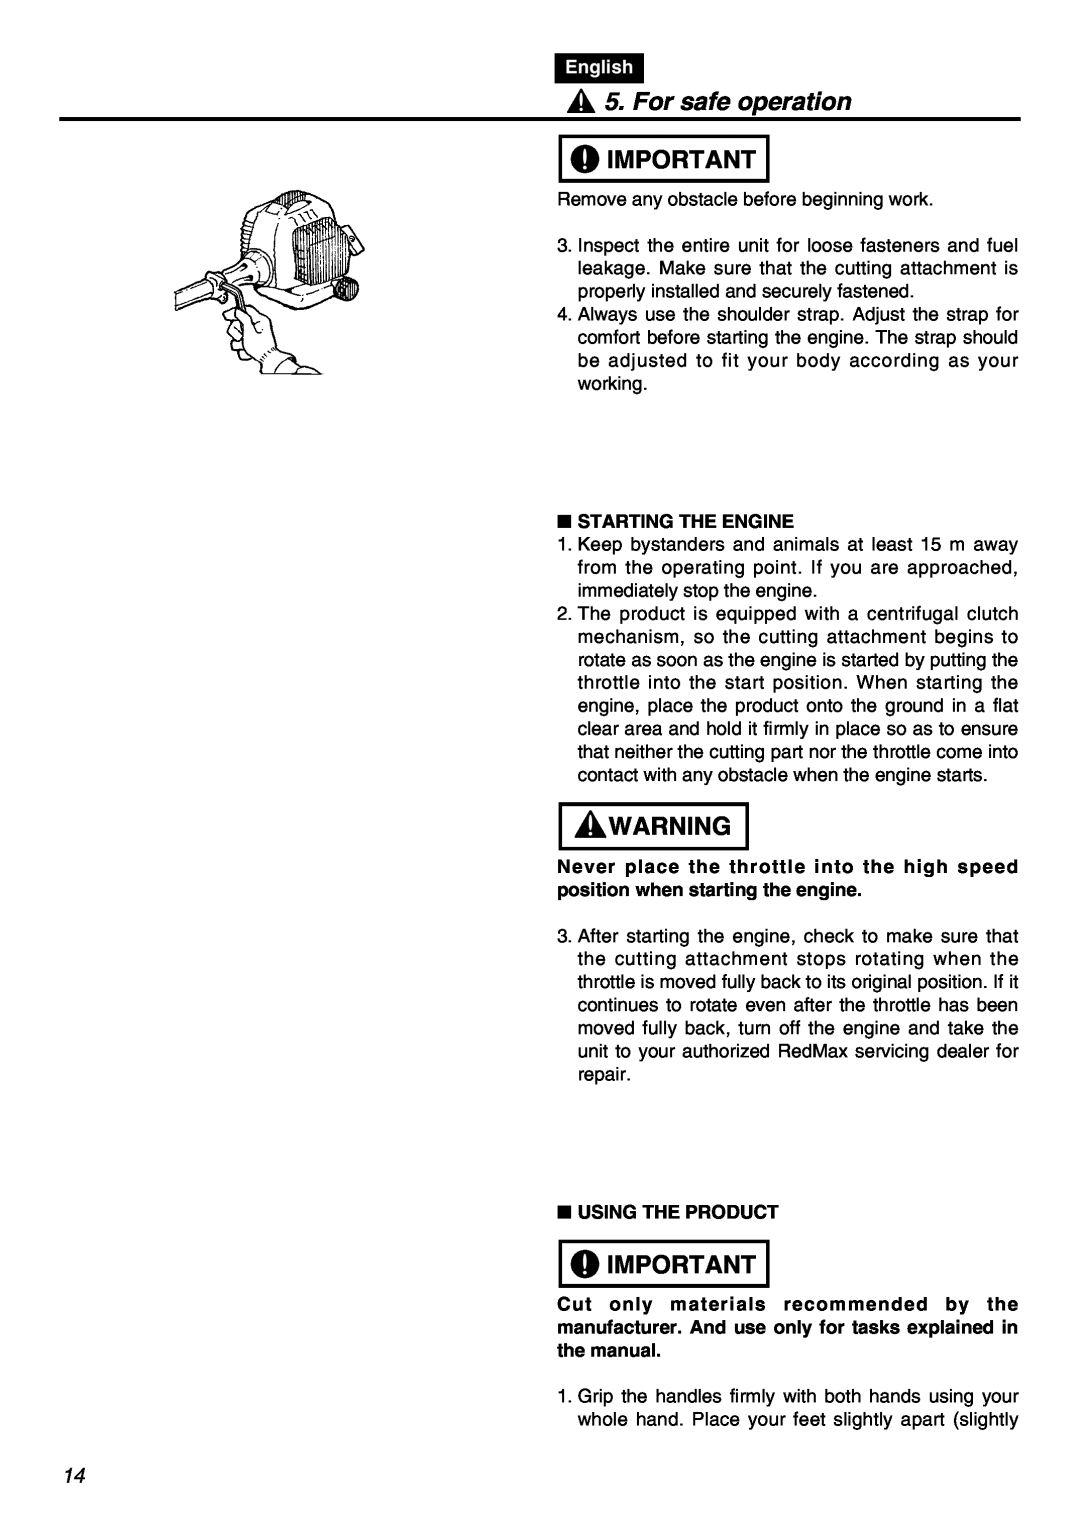 RedMax SRTZ2401F manual For safe operation, English, Starting The Engine, Using The Product 